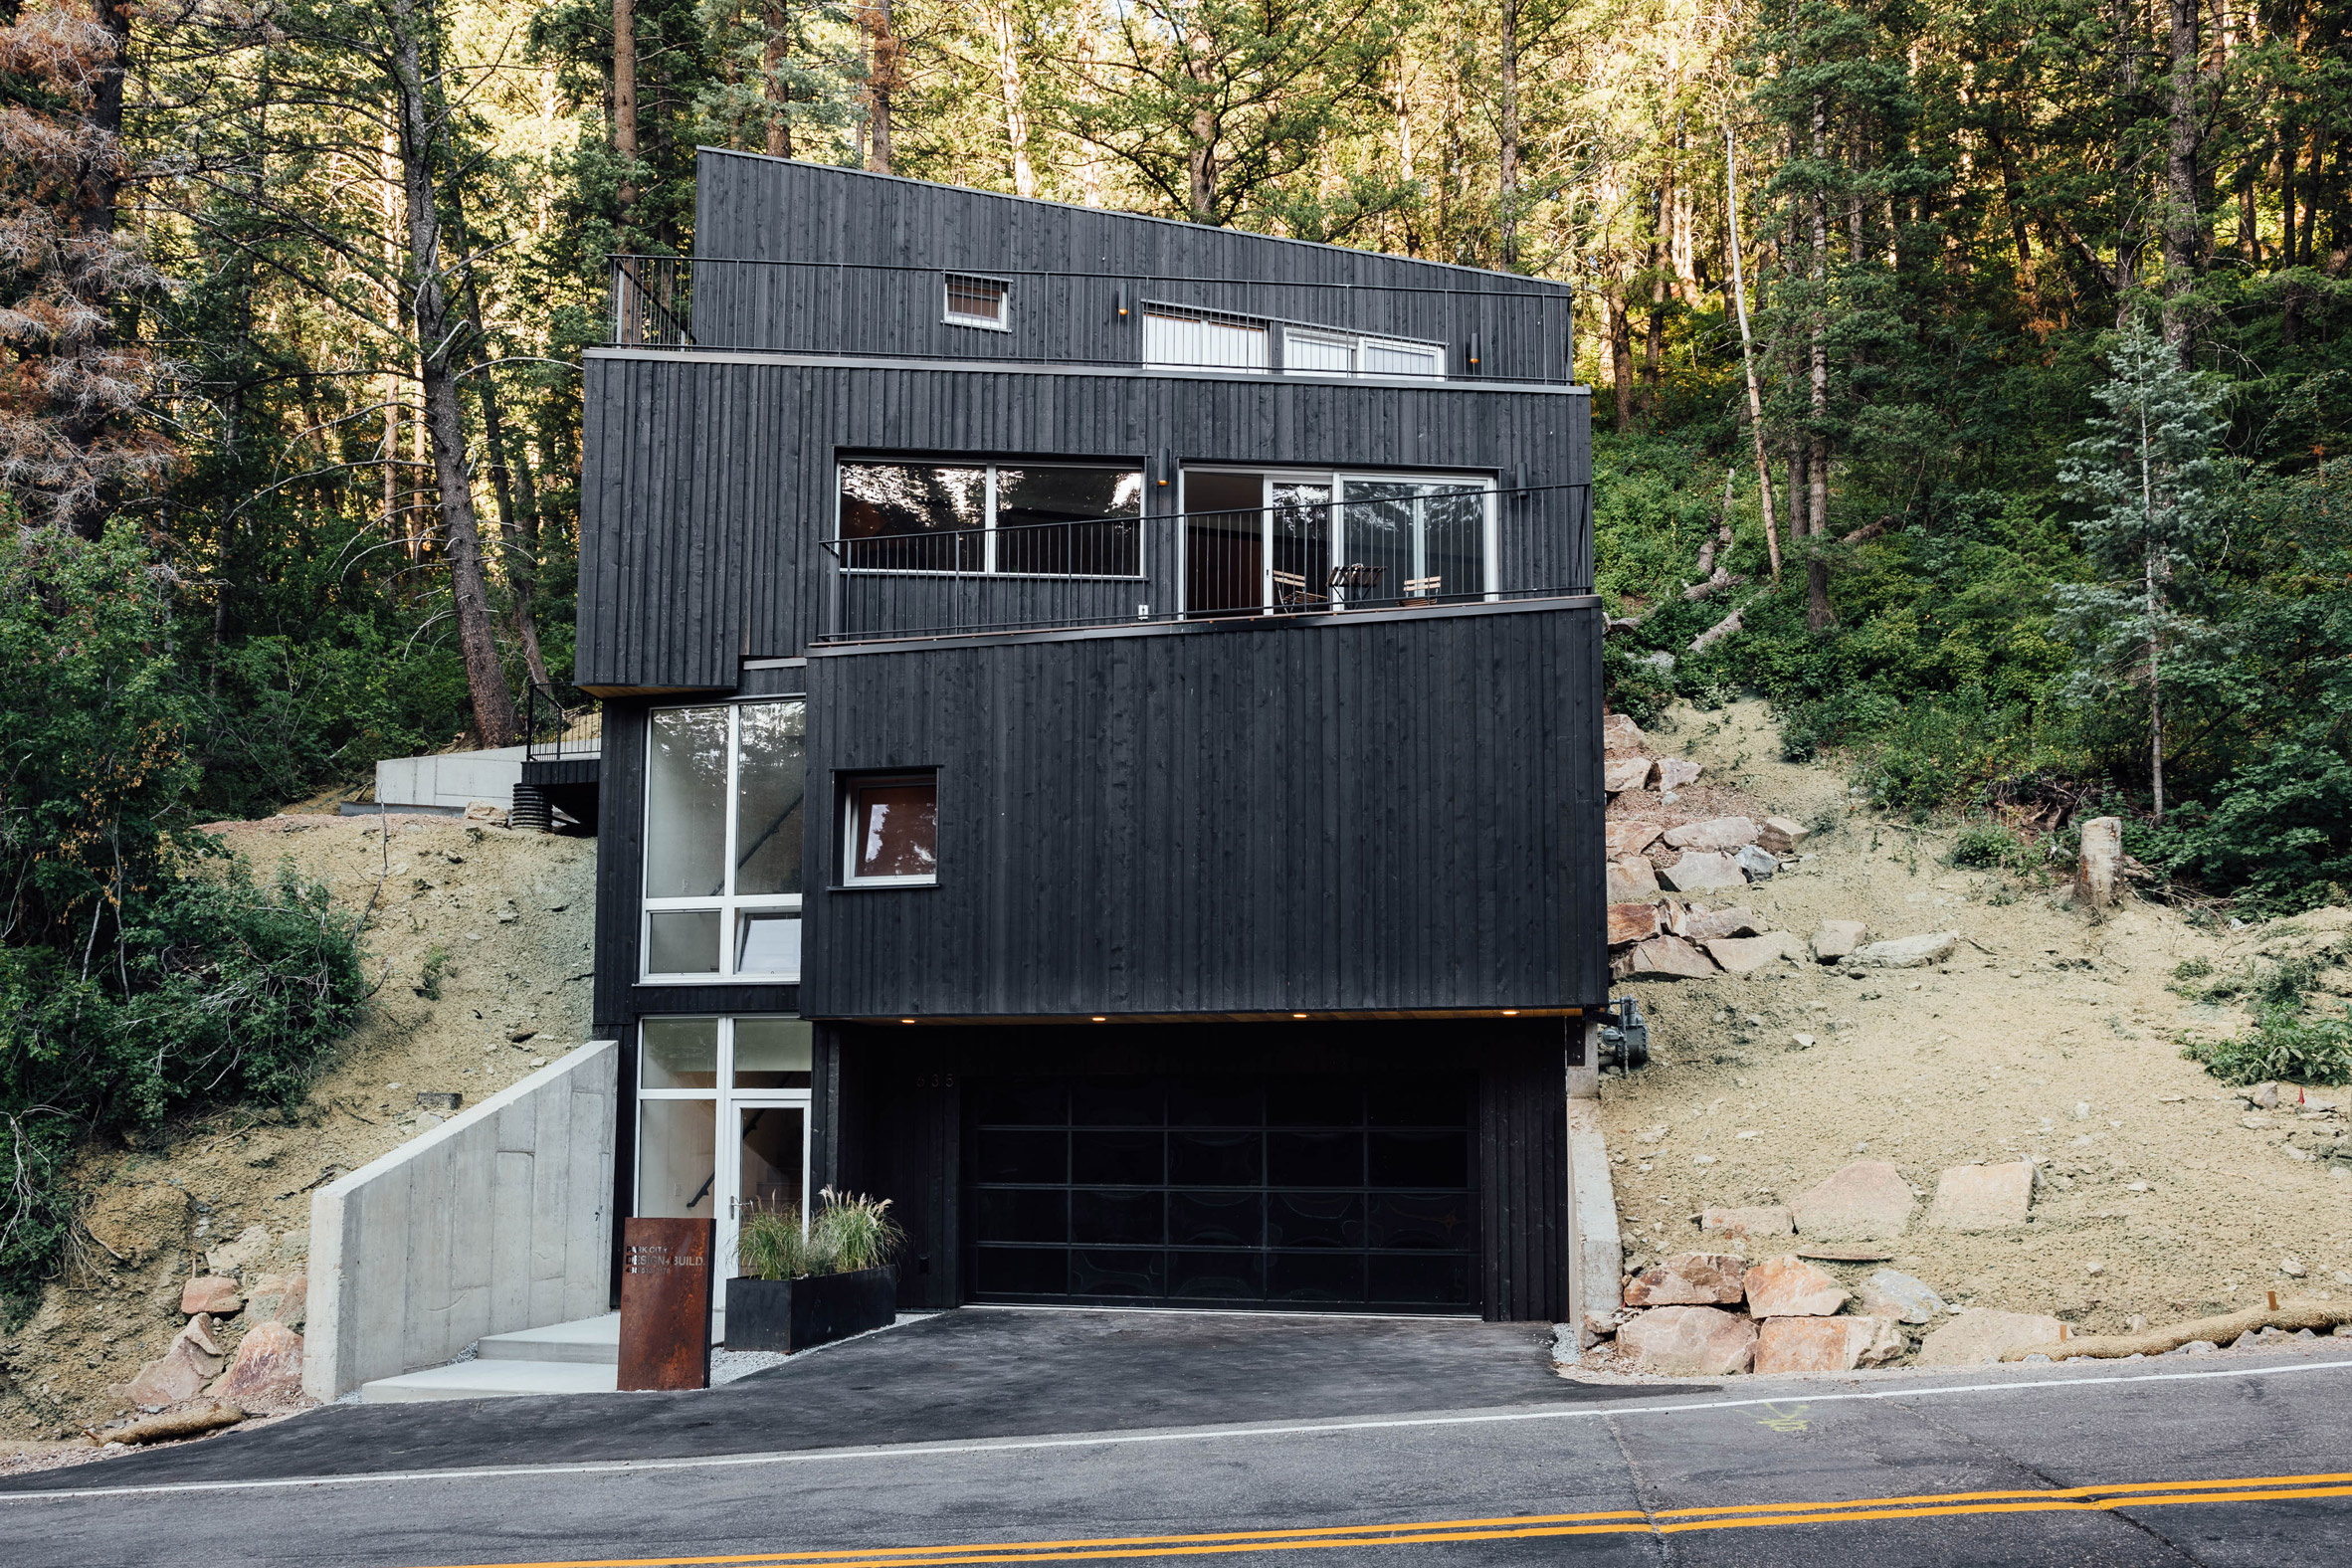 Chris Price's black TreeHaus staggers down wooded hill in Utah